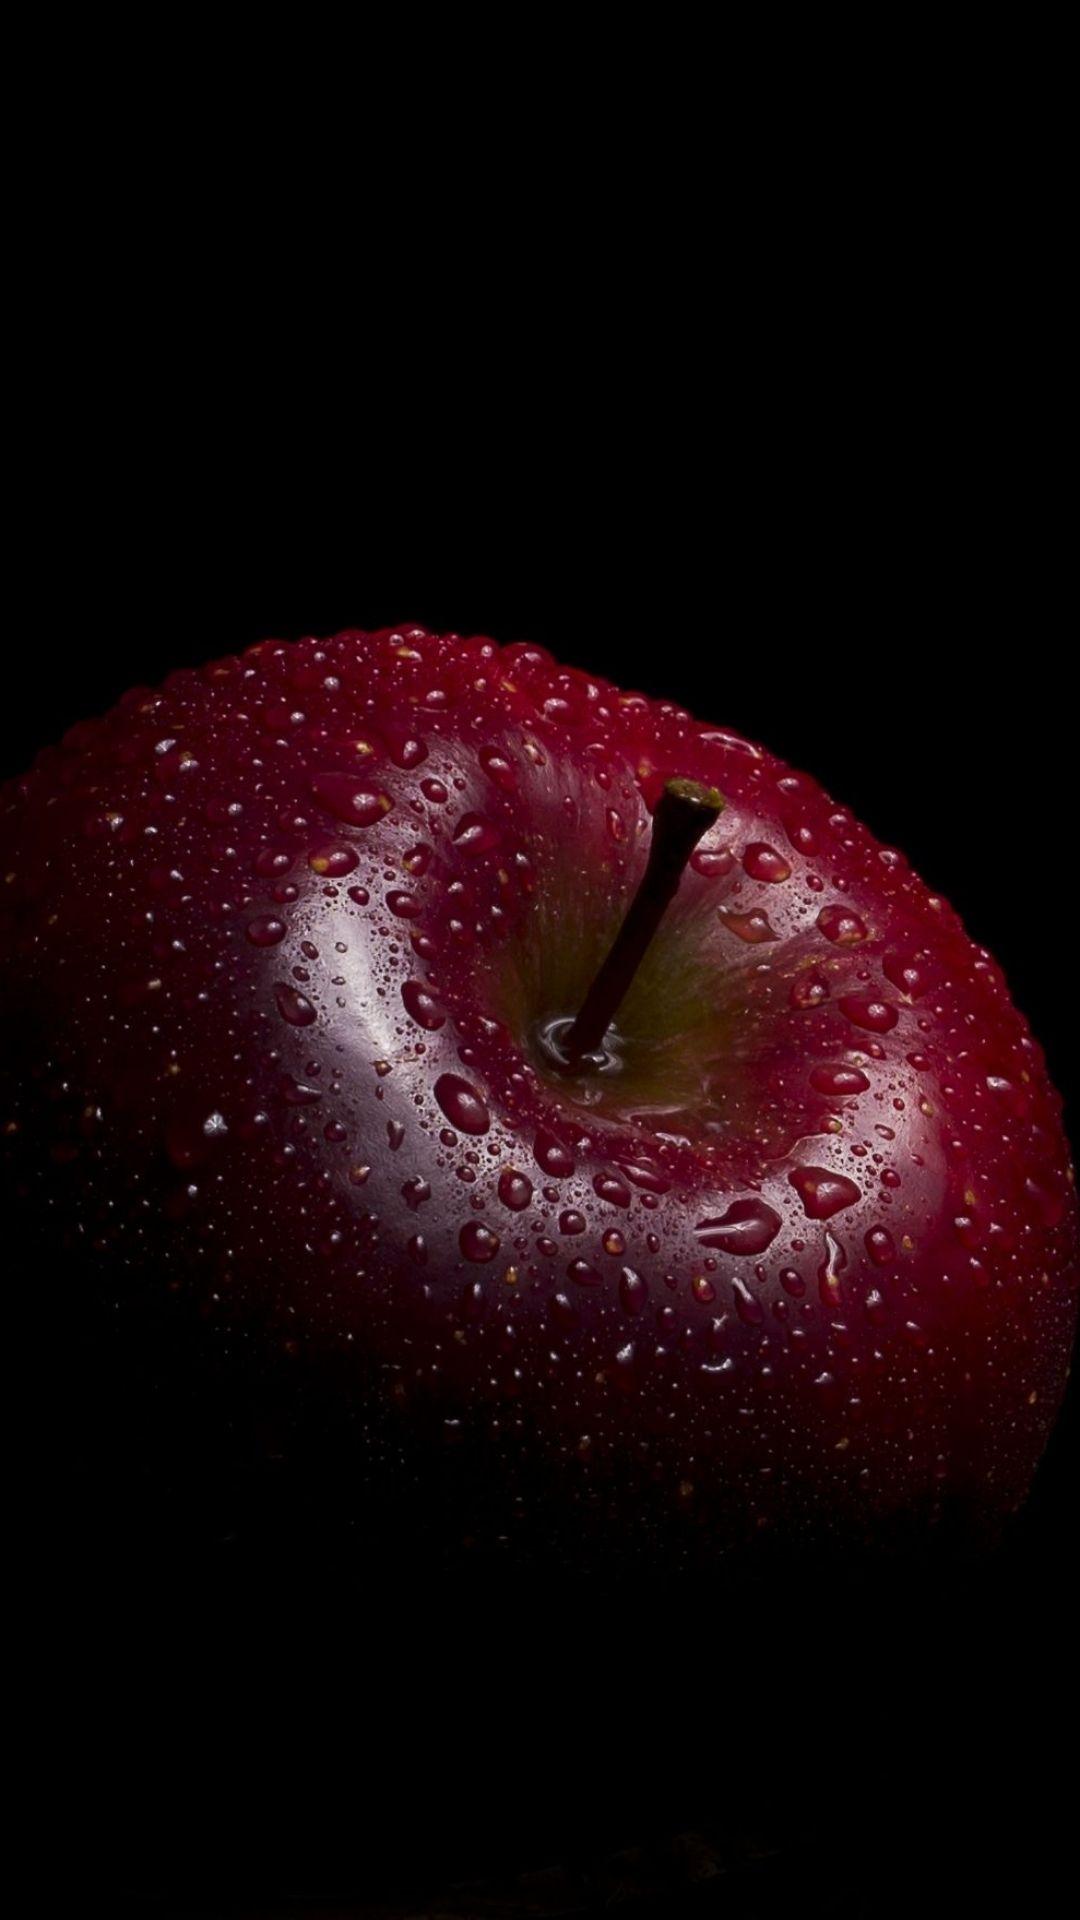 Download This Wallpaper Food Apple (1080x1920) For All Your